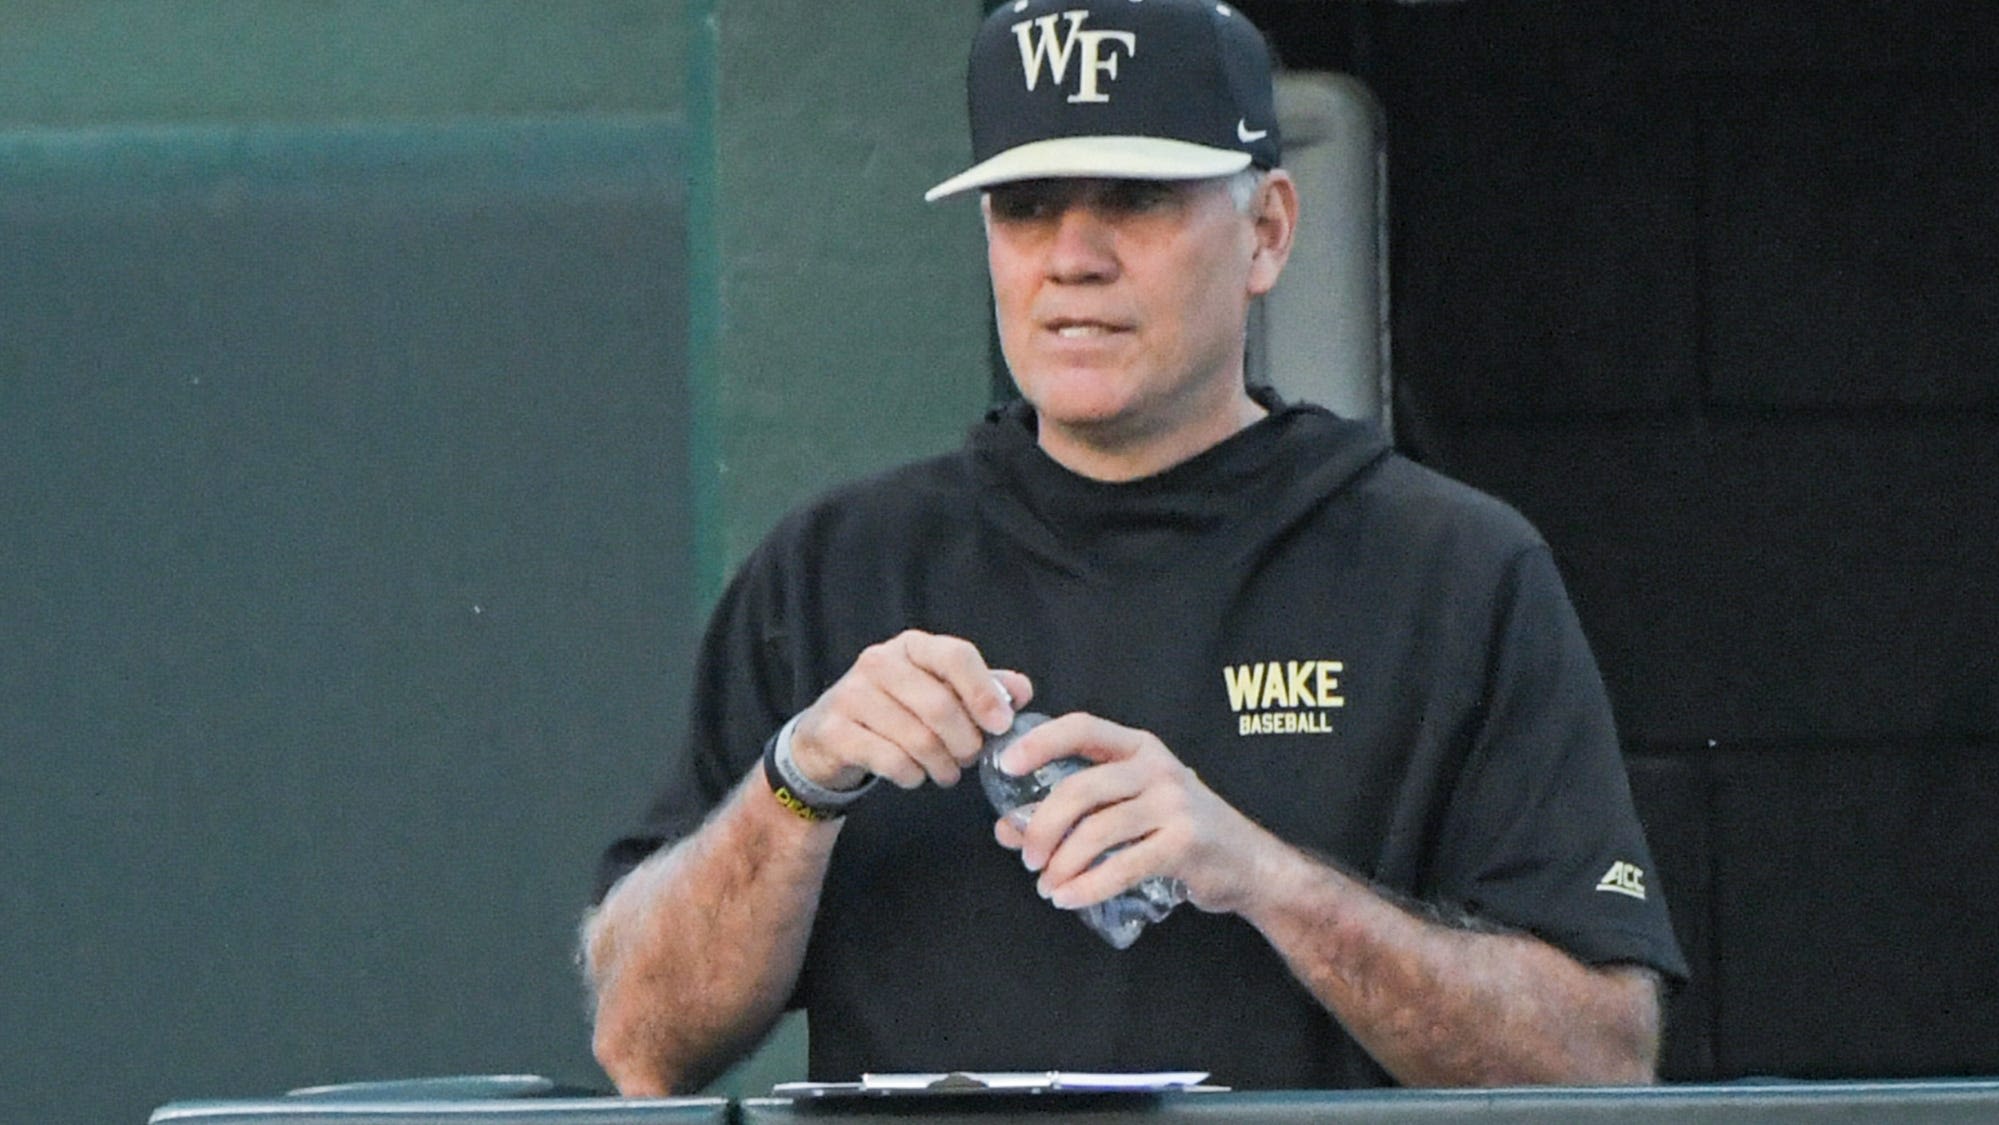 ACC baseball power rankings after Week 11: Wake Forest takes a big tumble